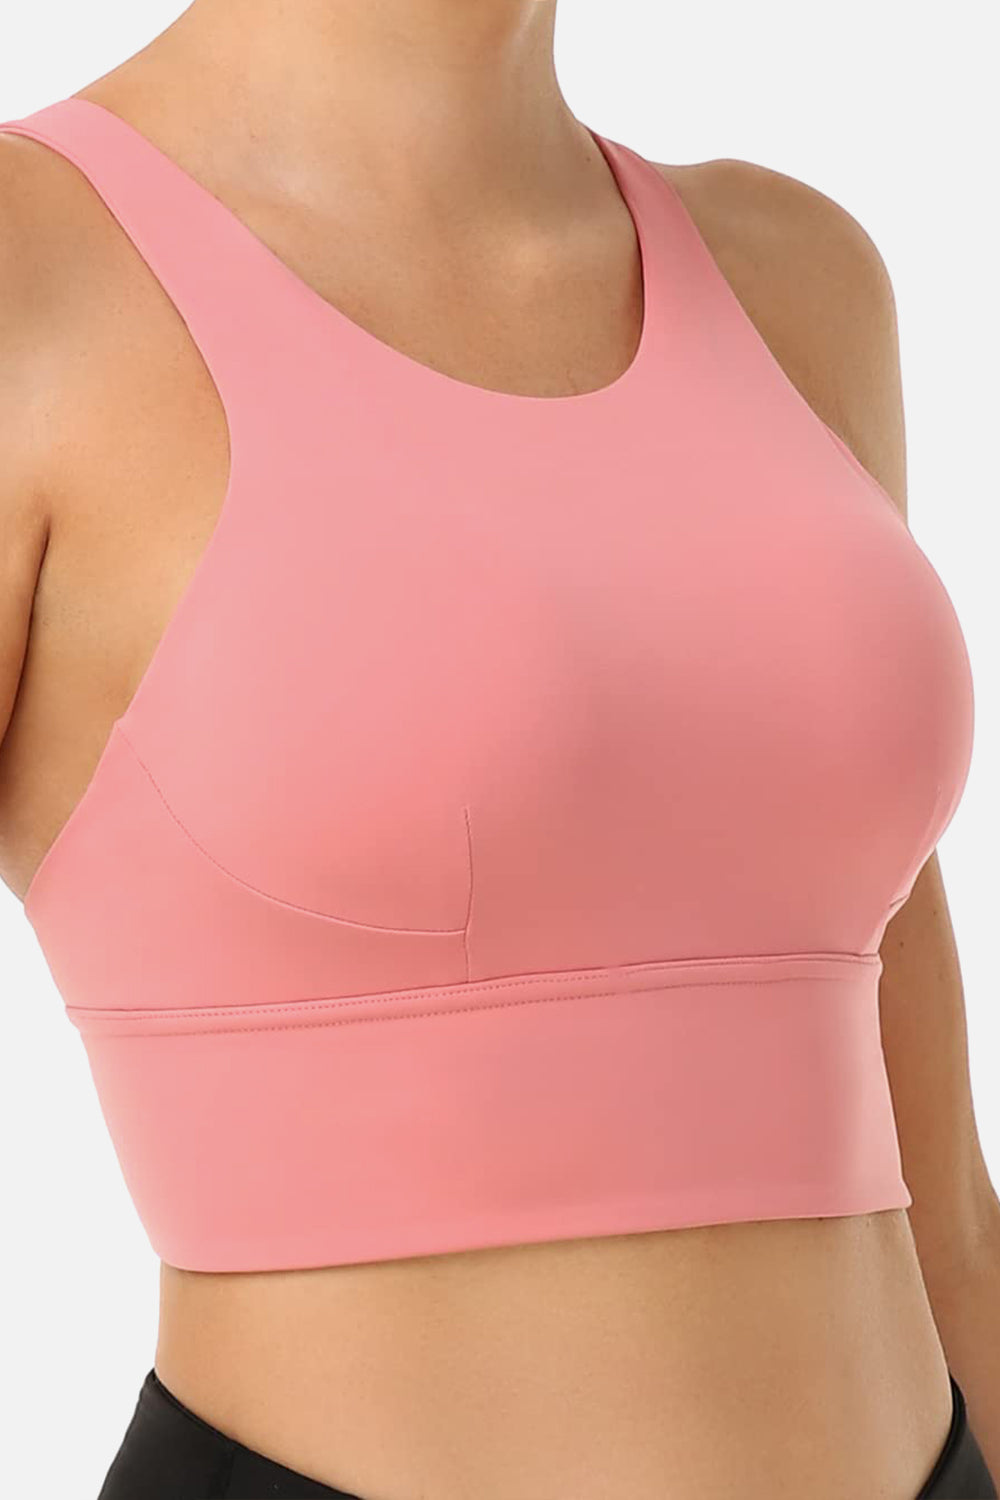 Racerback Bralette with Support - Medium Support